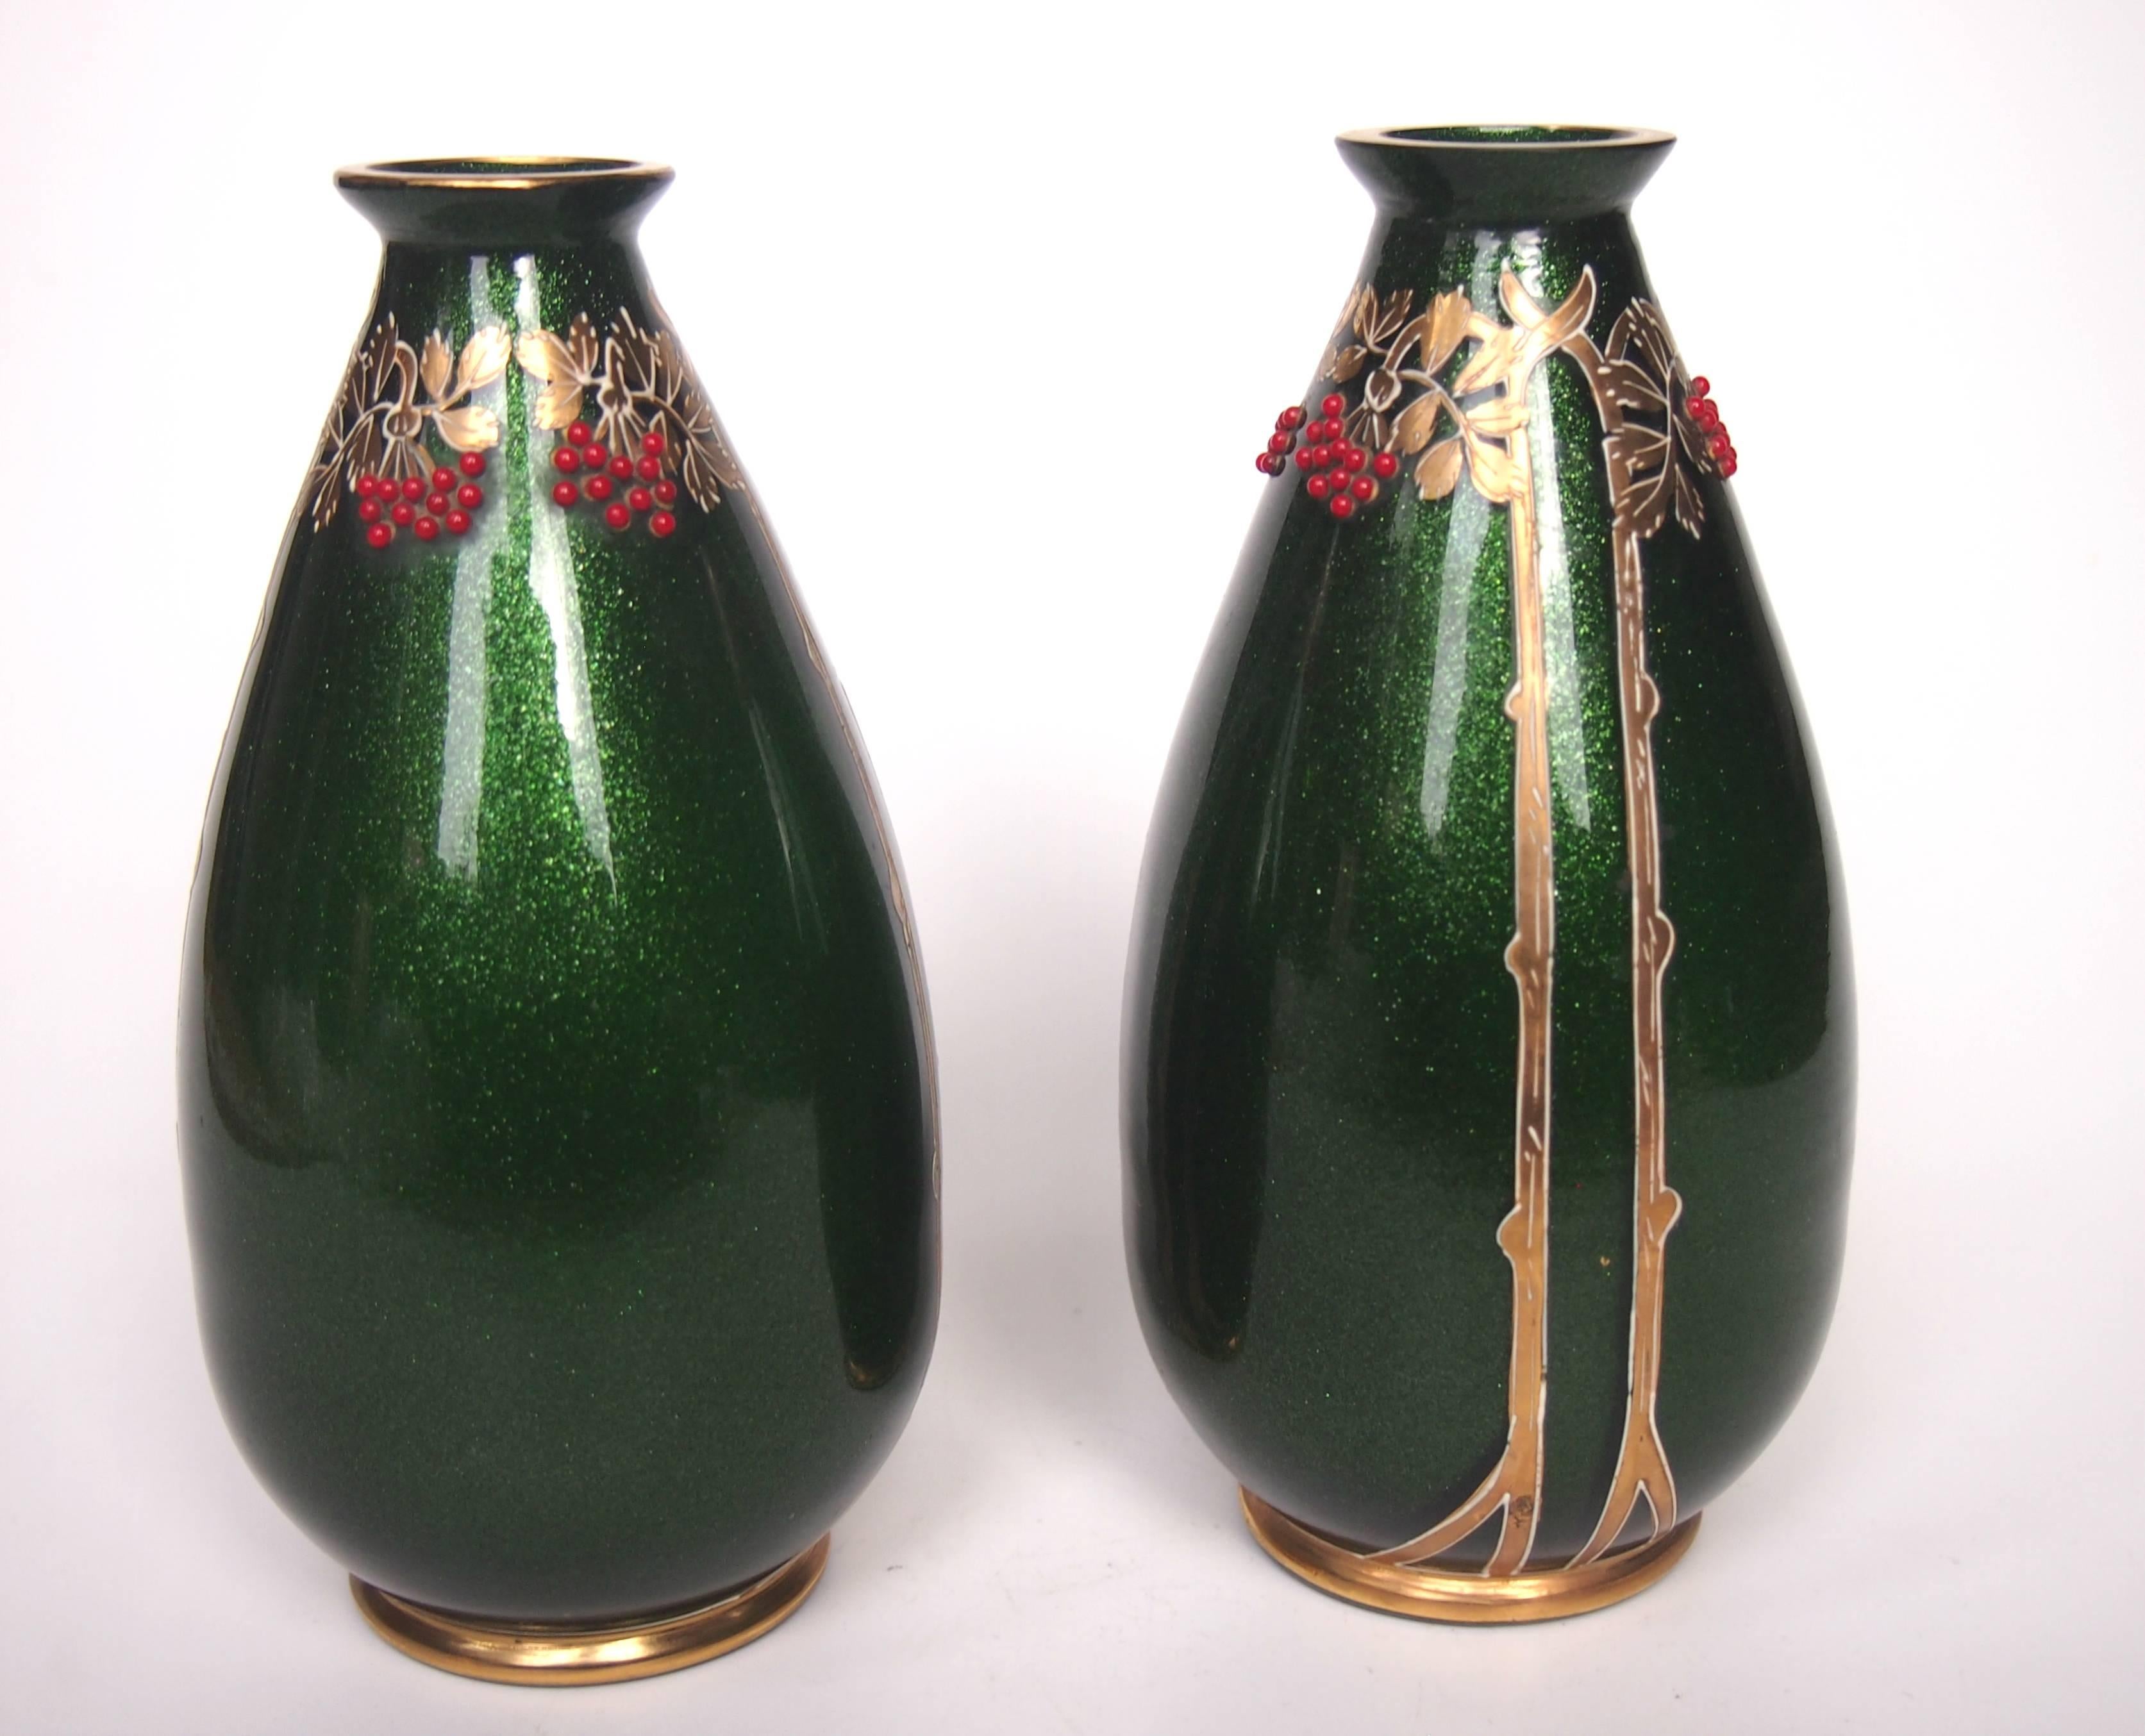 A super pair of Riedel vases in green aventurine (a sparkly green) with gilding over white enamel and tiny applied red glass beads. Riedel used a combination of the European styles of the time merging elements of Art Nouveau, Jugendstil and Vienna